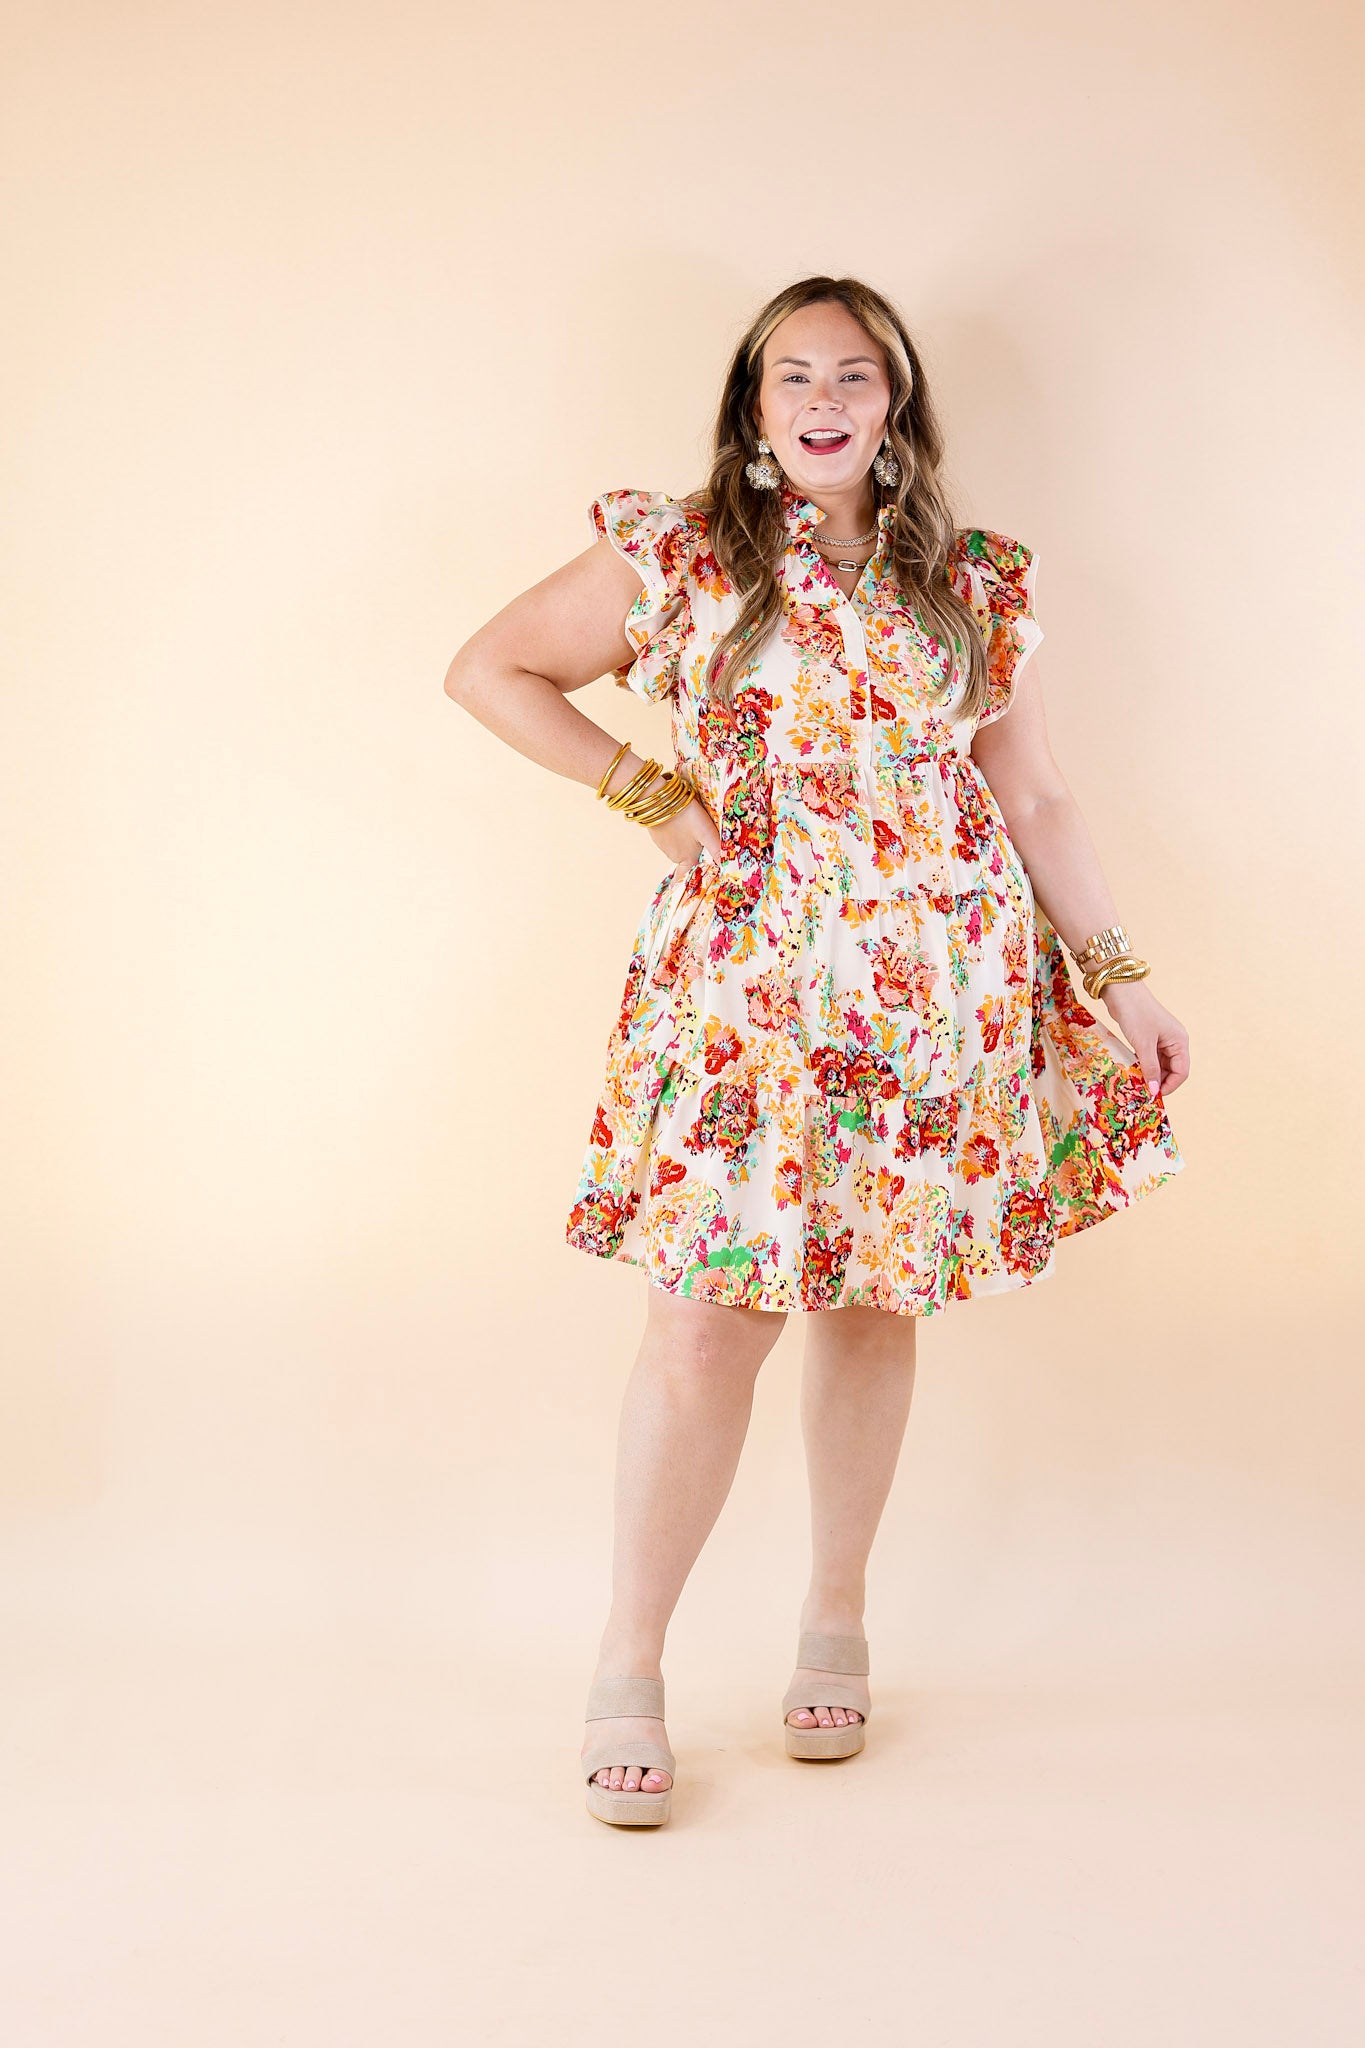 Best Route Floral Ruffle Cap Sleeve Dress in Cream - Giddy Up Glamour Boutique